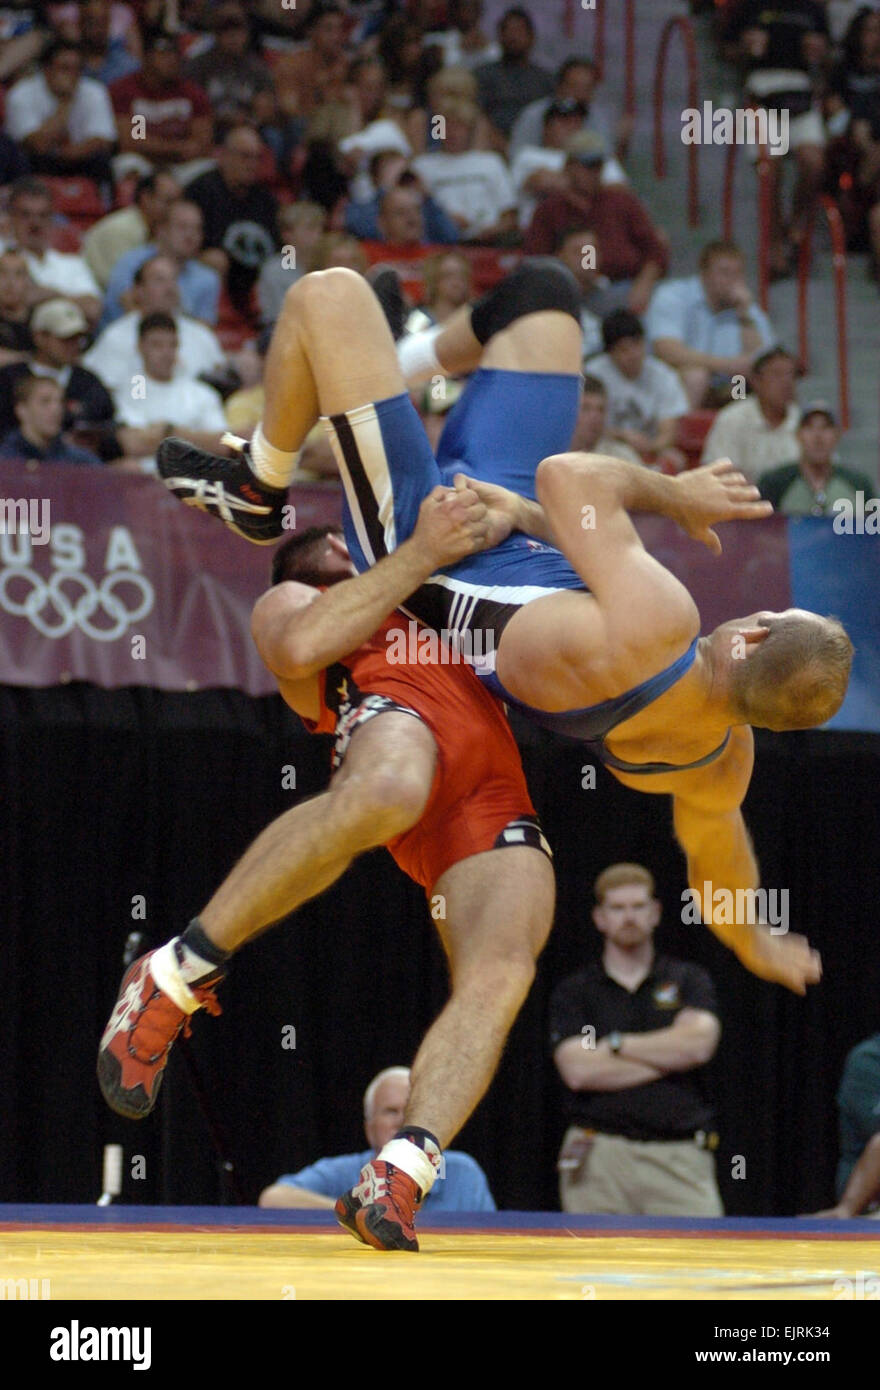 Army Wrestler Earns Greco-Roman Berth in Beijing Olympics  Tim Hipps June 23, 2008  In the final wrestling tournament of his career, Staff Sgt. Keith Sieracki throws U.S. Army World Class Athlete Program teammate Sgt. Jess Hargrave during their 74-kilogram Greco-Roman match in the 2008 U.S. Olympic Team Trials for Wrestling June 14 at the University of Nevada, Las Vegas' Thomas &amp; Mack Center.   see: /-news/2008/06/23/10283-army-wrestler-earns-g...  /-news/2008/06/23/10283-army-wrestler-earns-greco-roman-berth-in-beijing-olympics/ Stock Photo